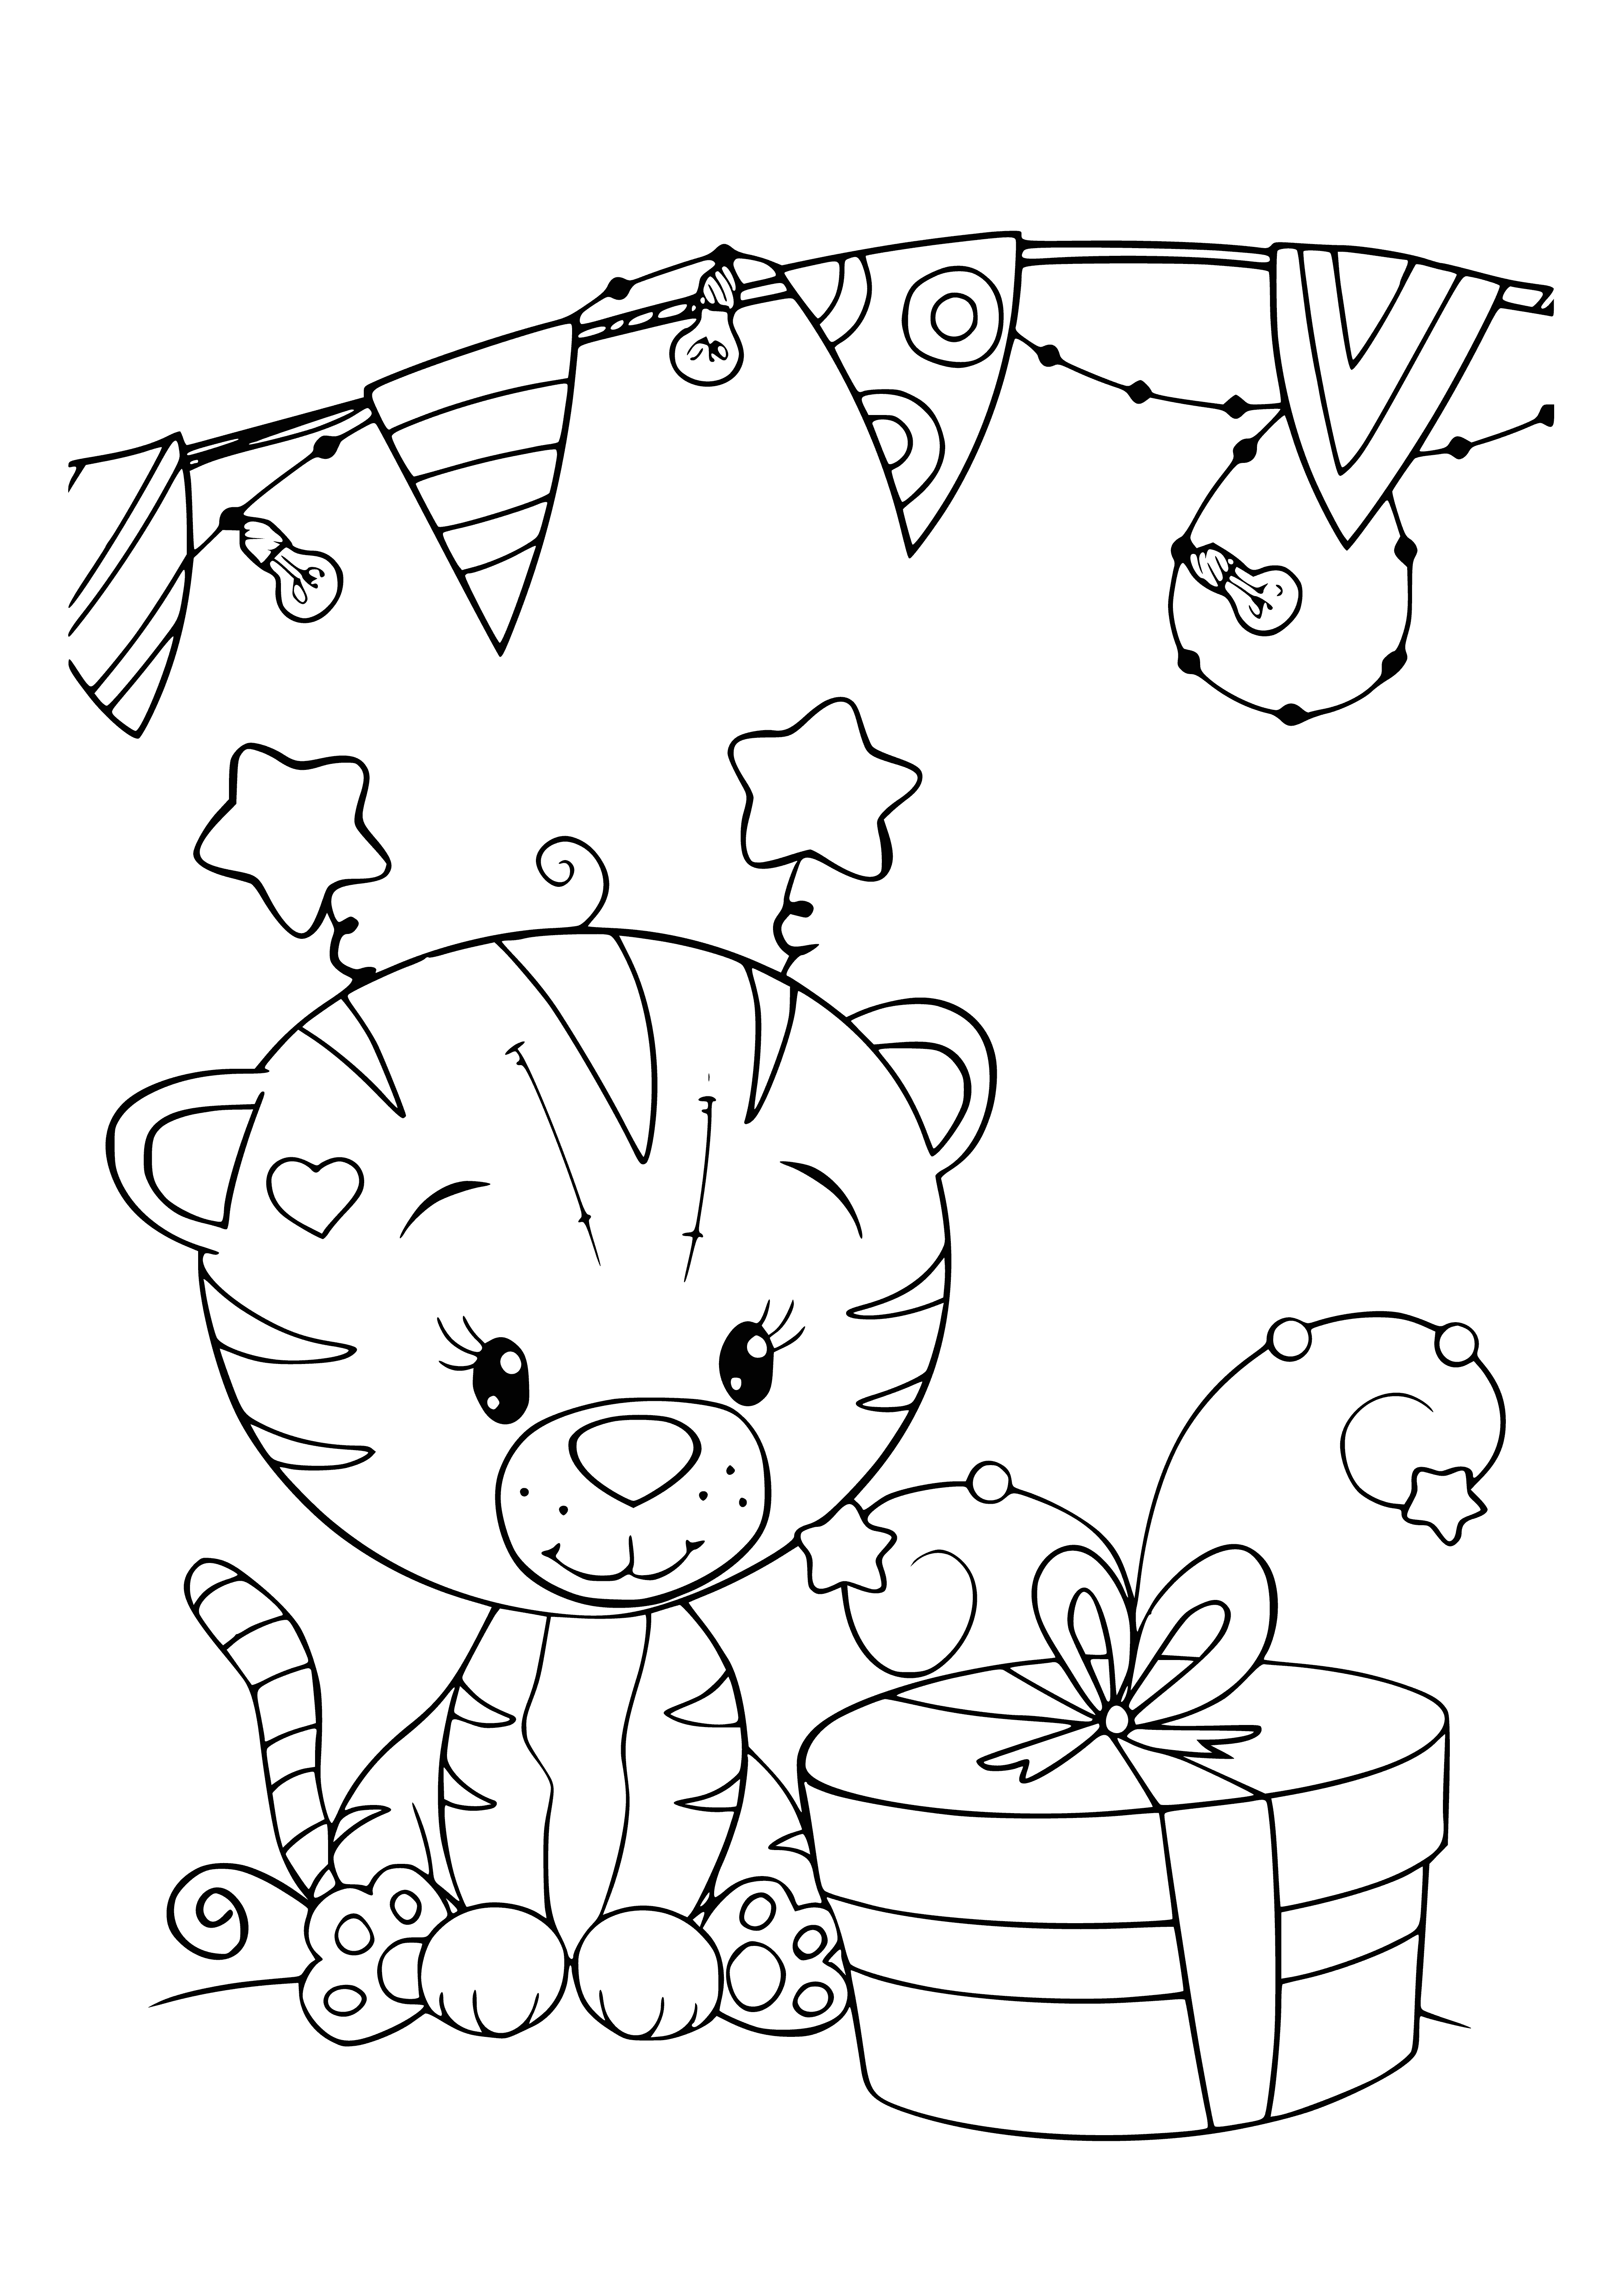 coloring page: Tiger cub holding gift wearing a red bow; present in red bow w/ white polka dots. #kawaii #cute #coloringpages